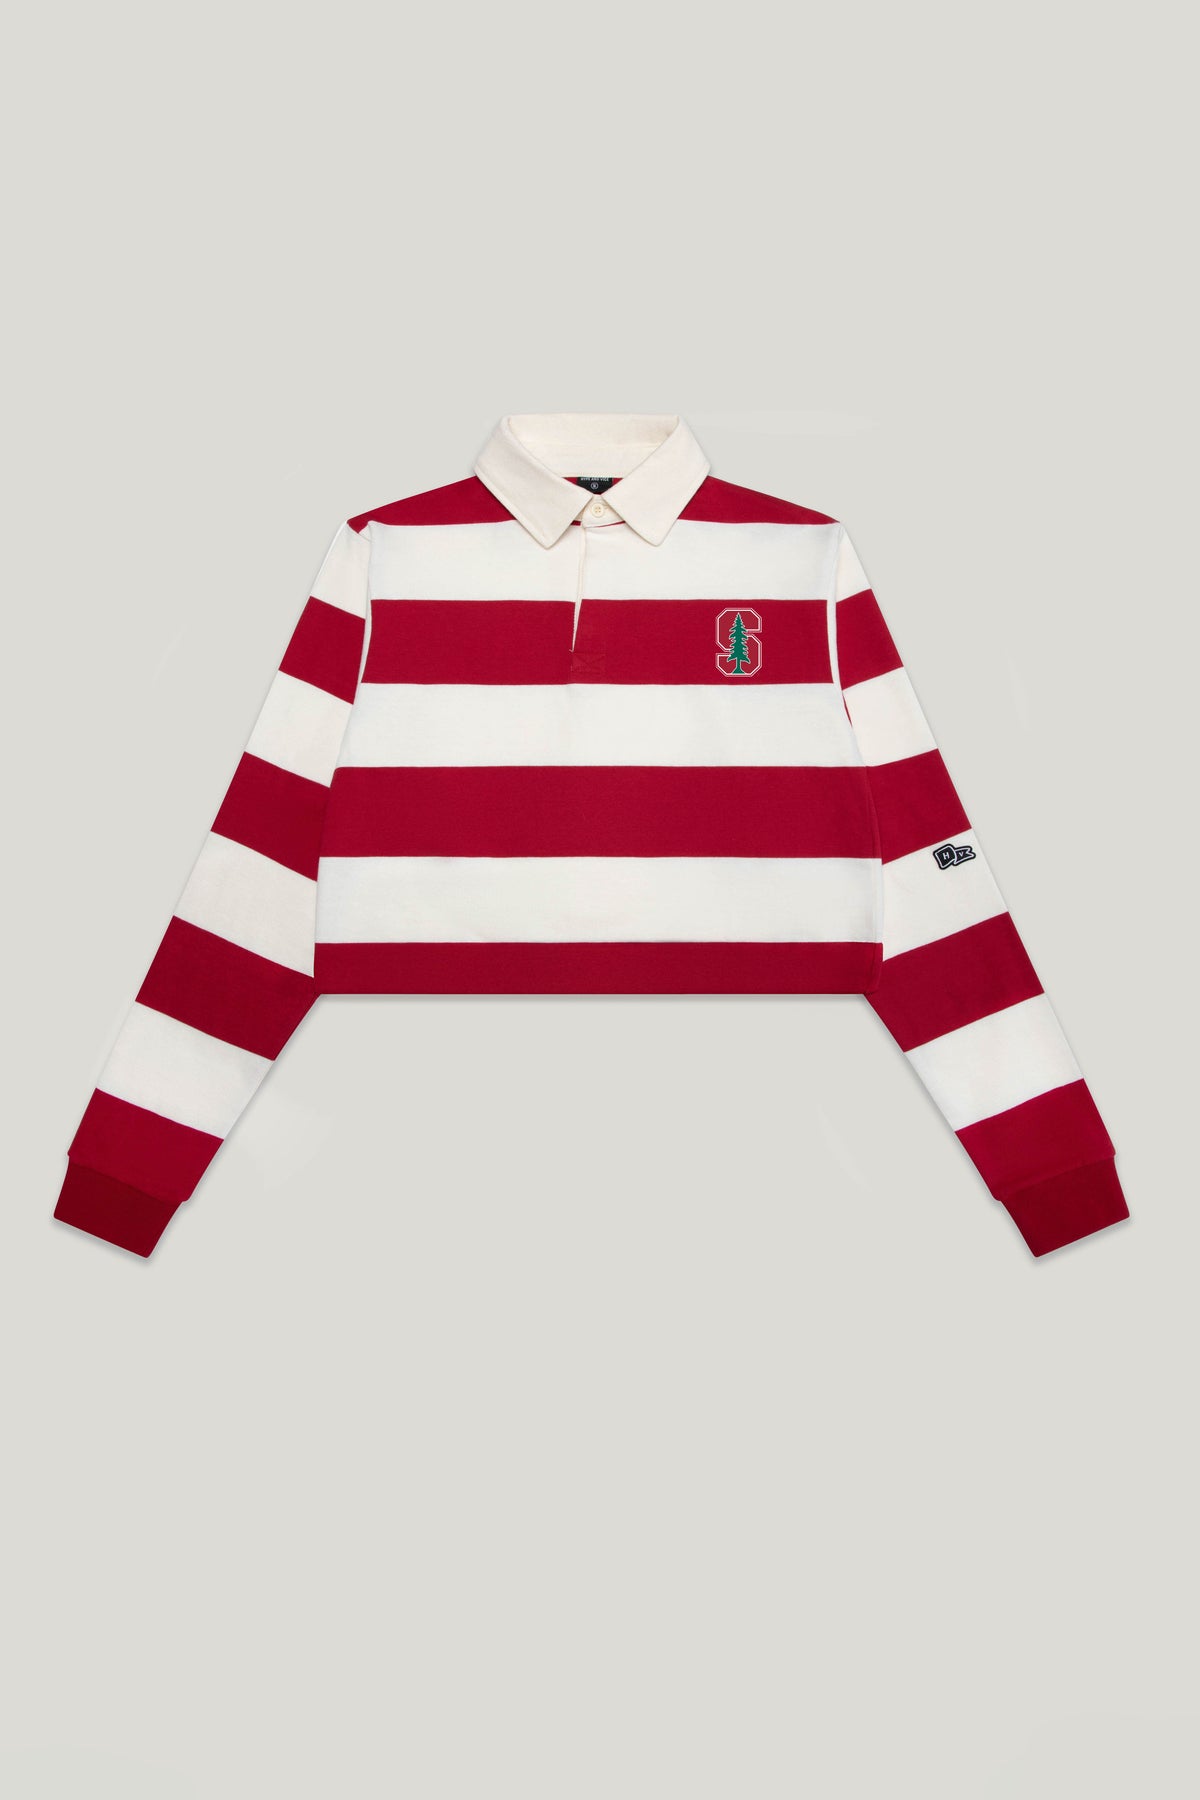 Stanford Rugby Top